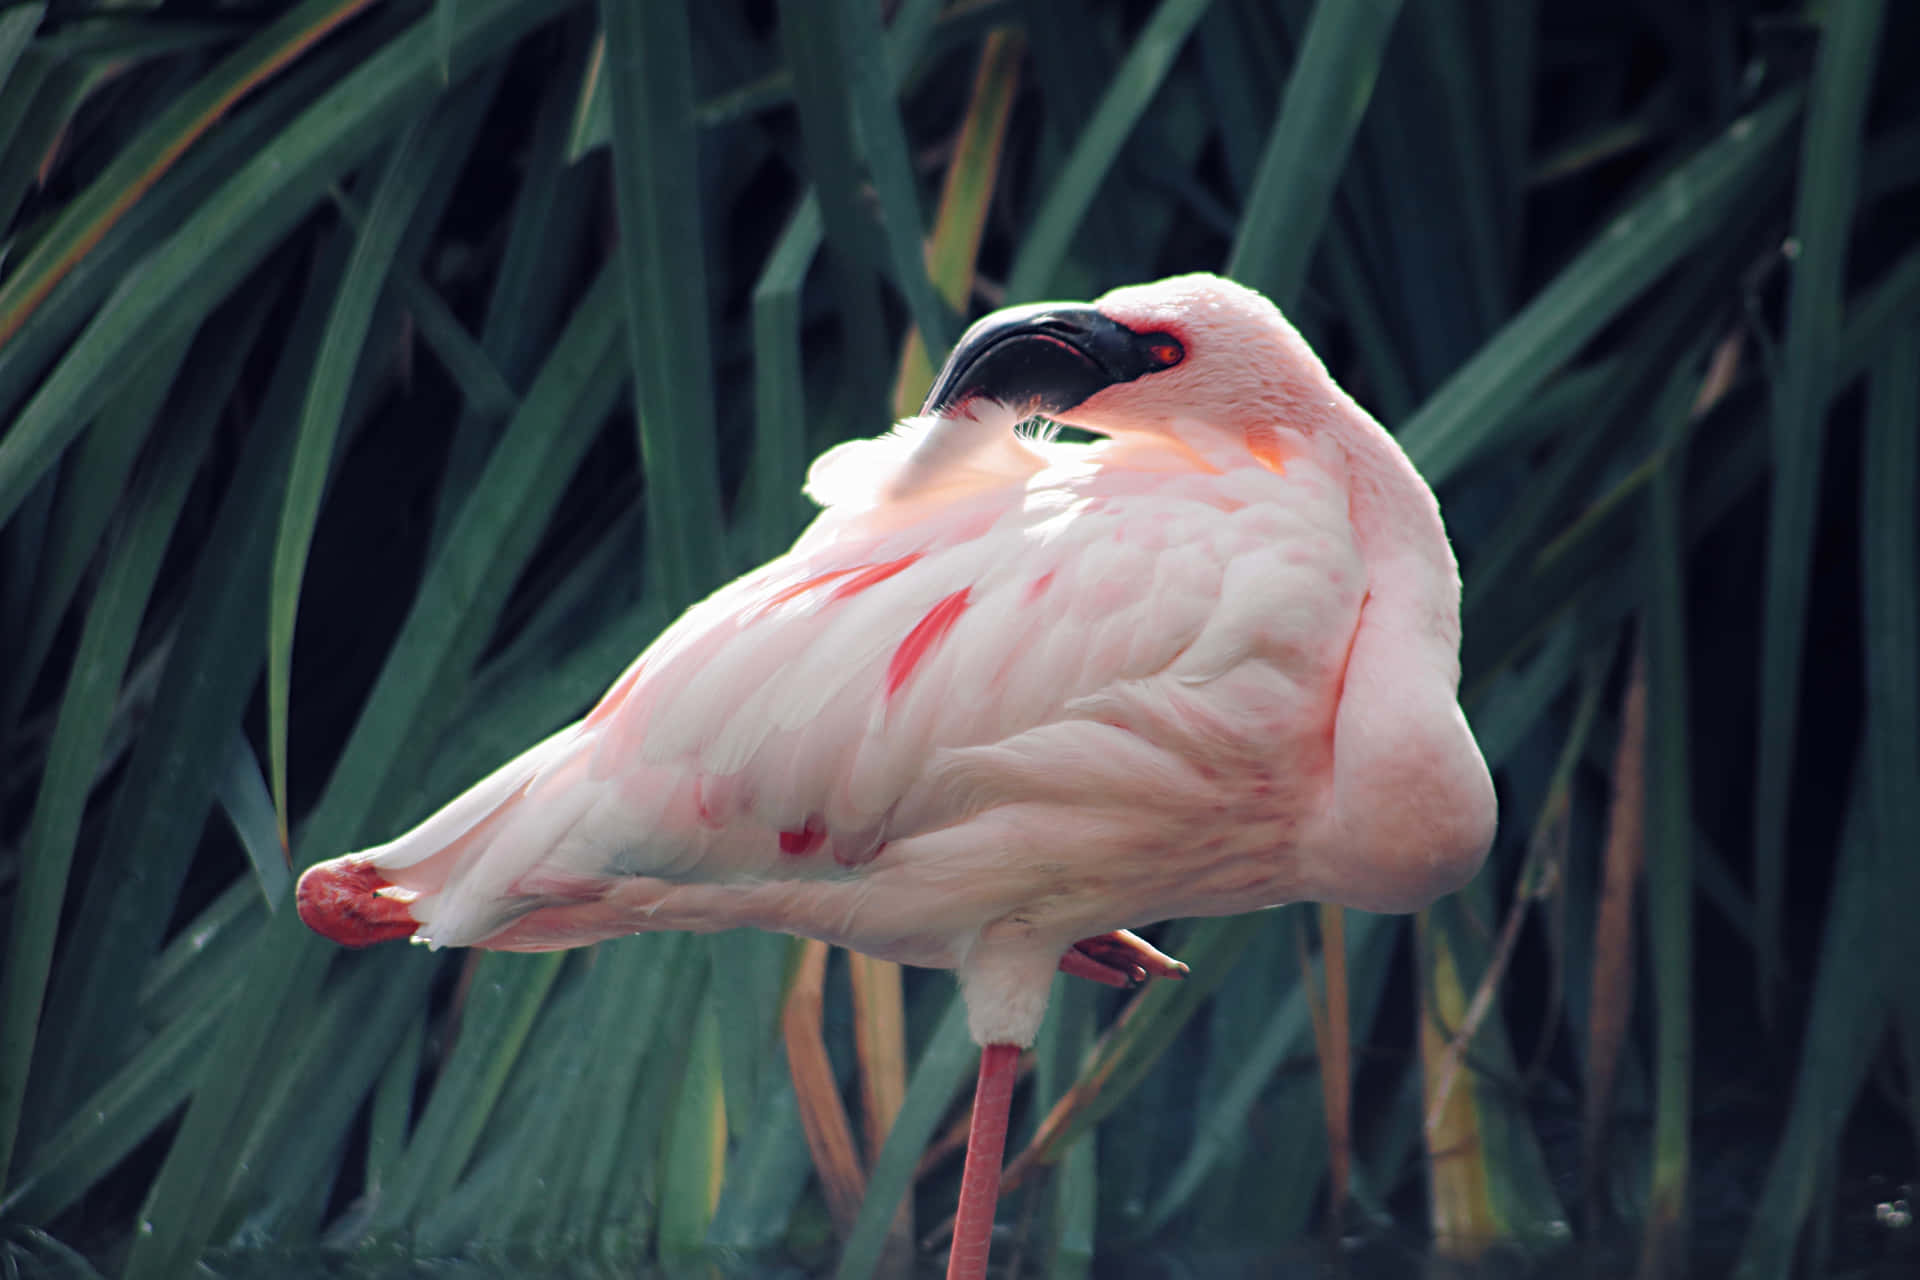 A vibrant pink flamingo is on display in a beautiful beach side setting.